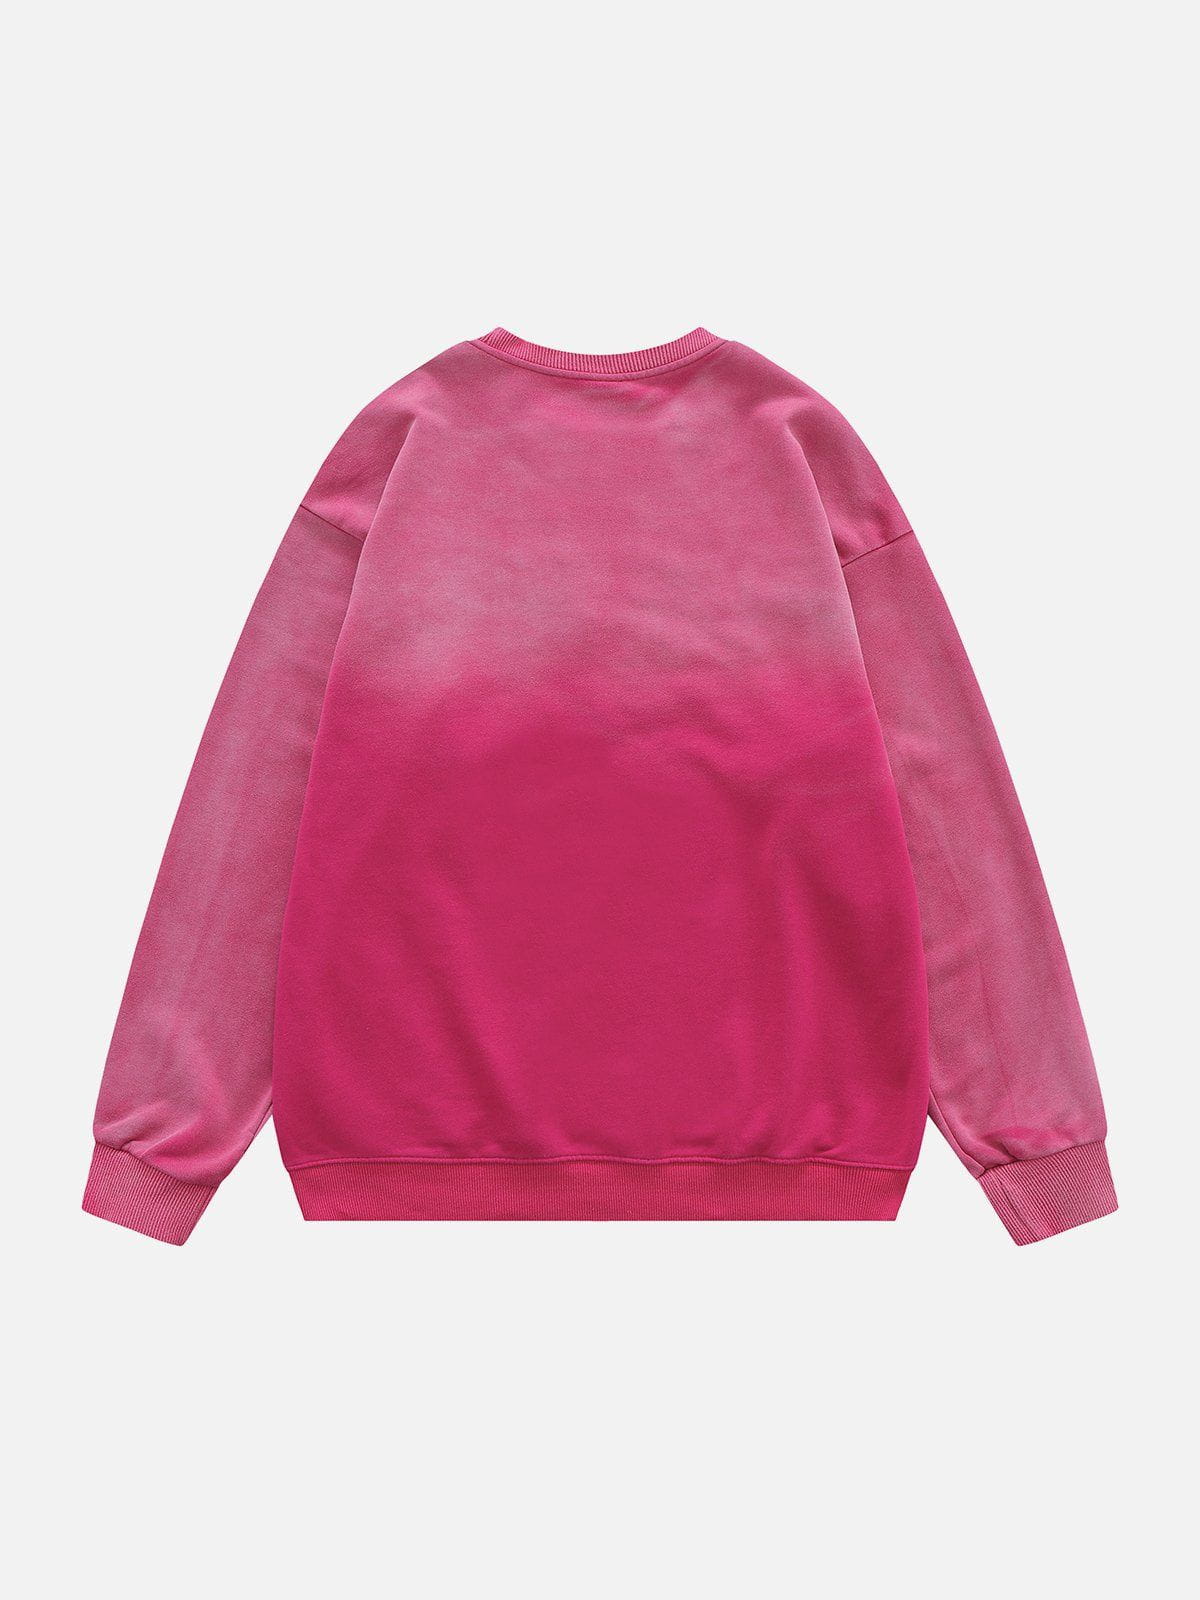 LUXENFY™ - Washed Gradient Embroidered Sweatshirt luxenfy.com